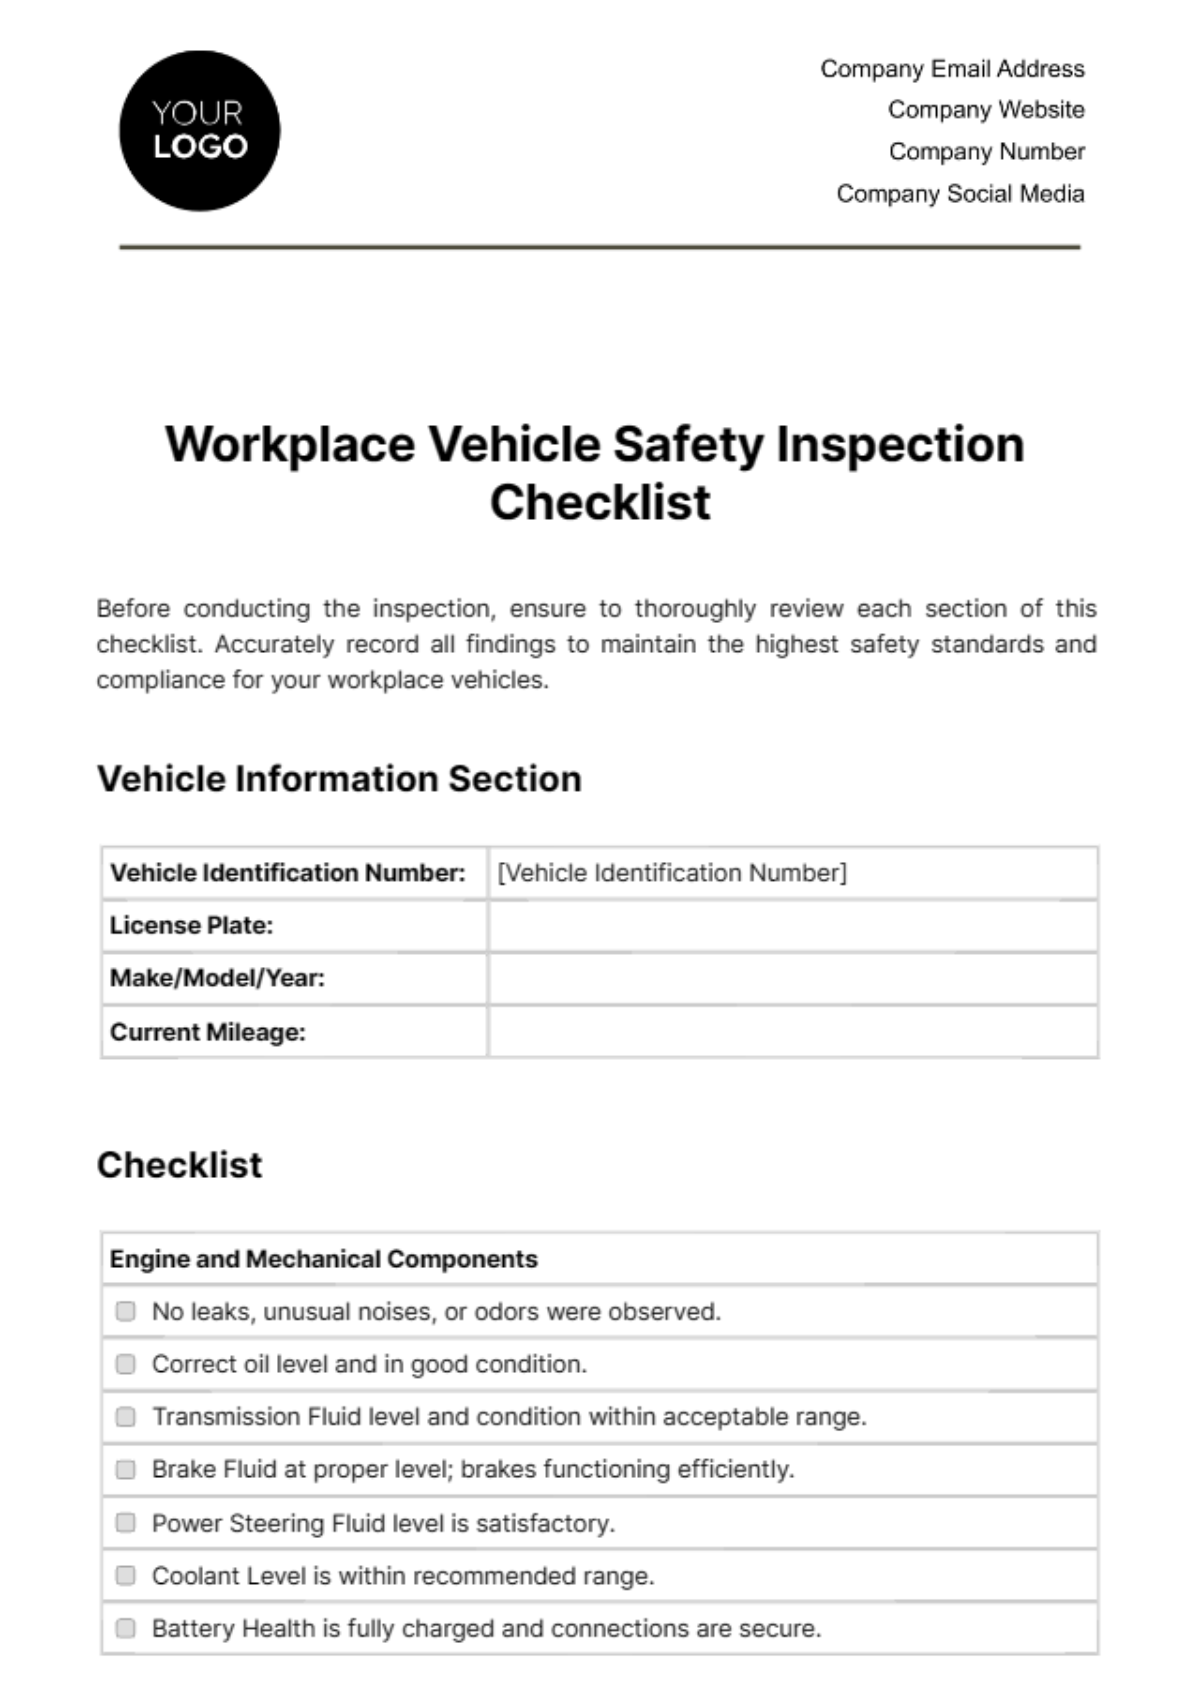 Free Workplace Vehicle Safety Inspection Checklist Template